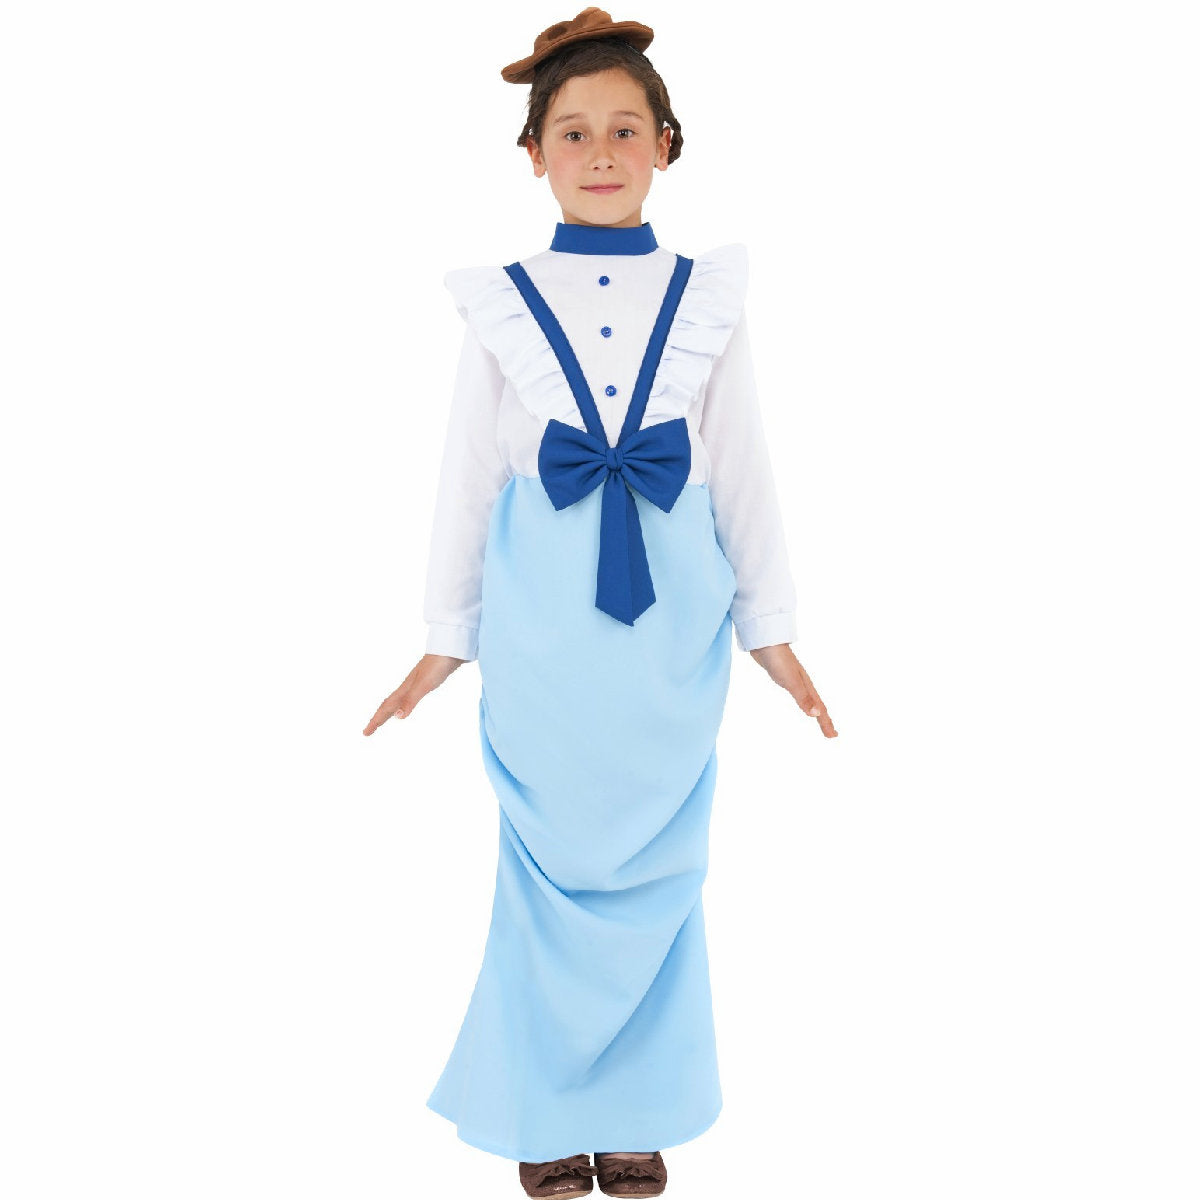 Posh Victorian Girl's Fancy Dress Costume with Hat